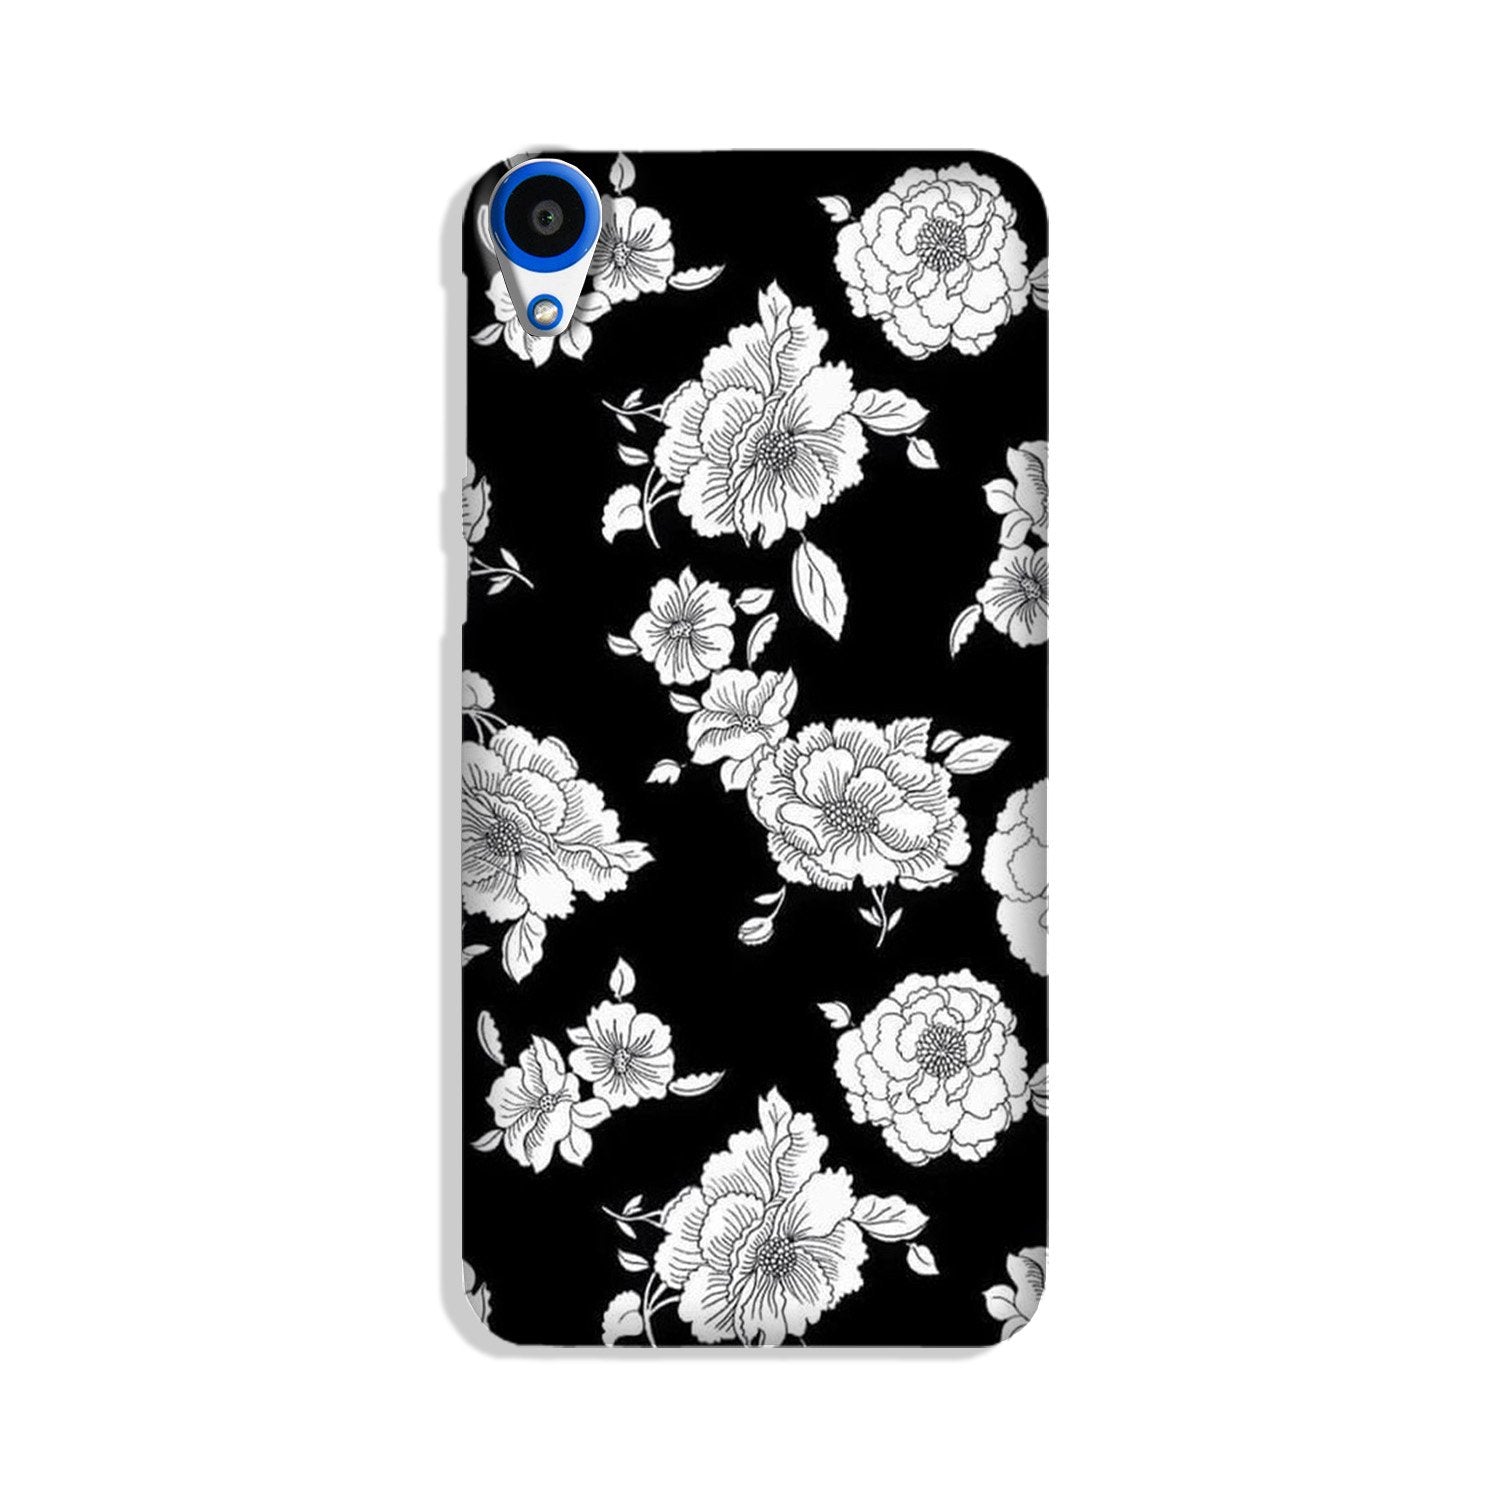 White flowers Black Background Case for HTC Desire 820